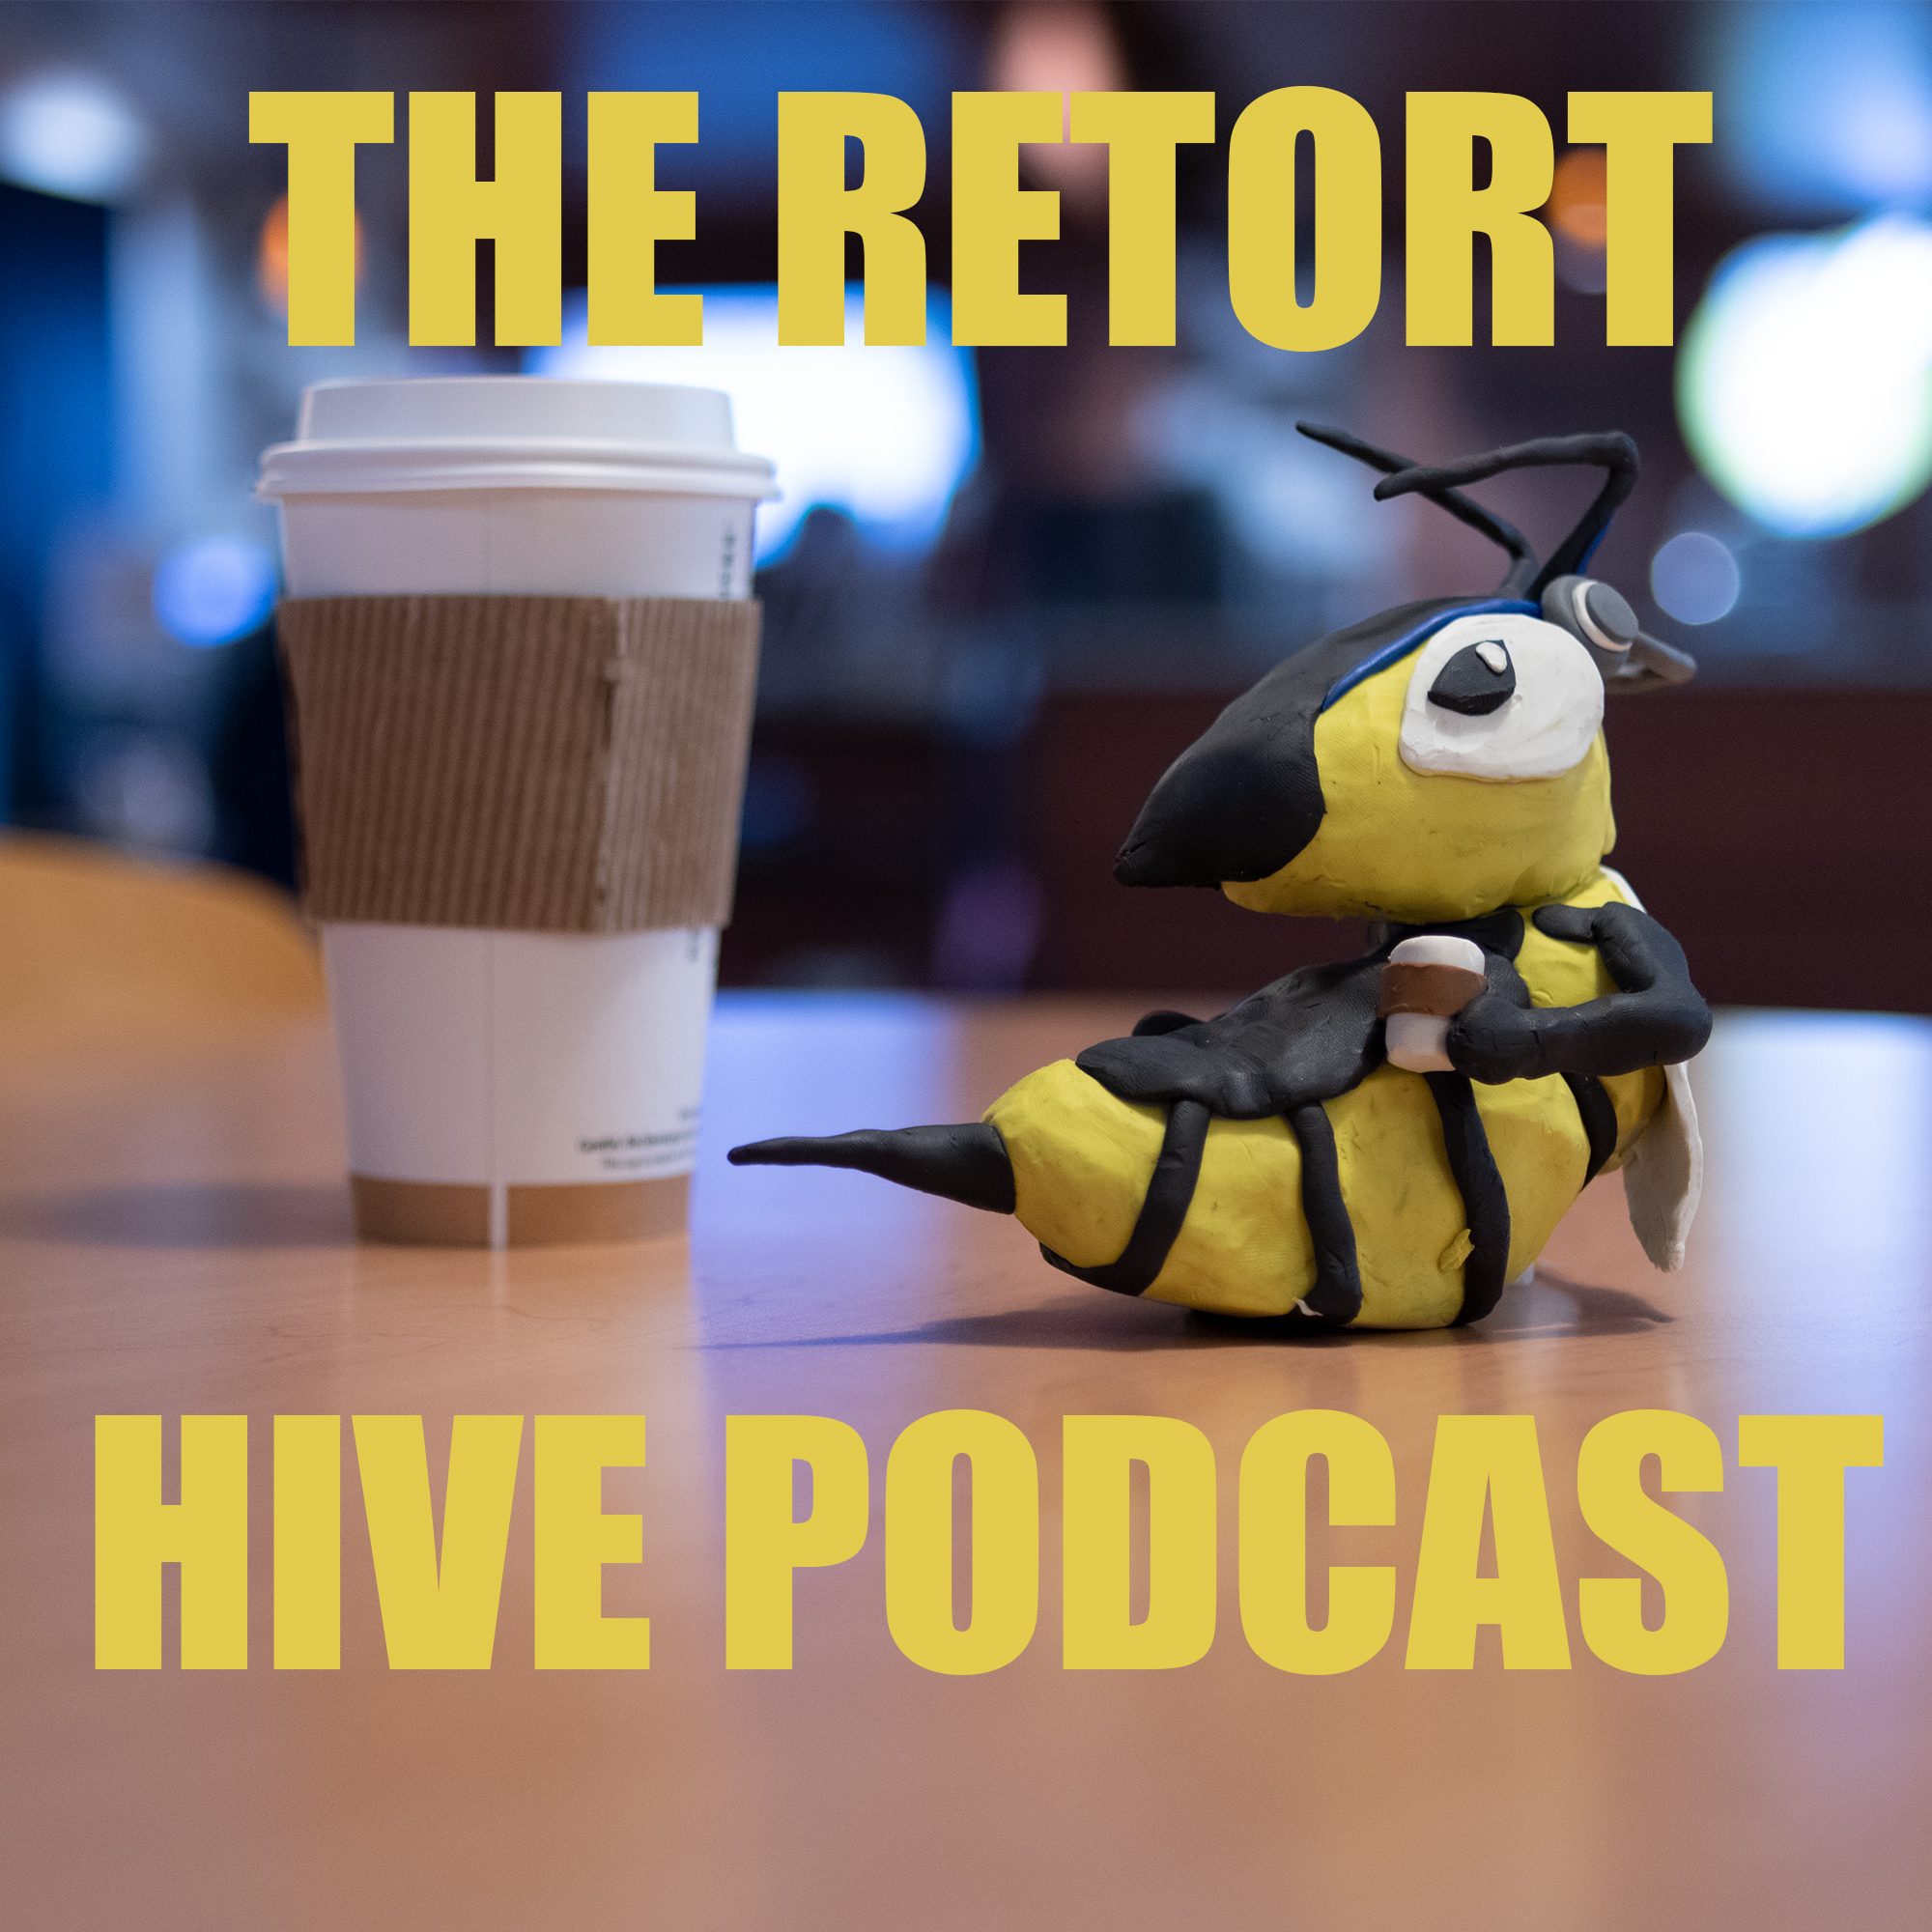 The Hive Podcast Logo